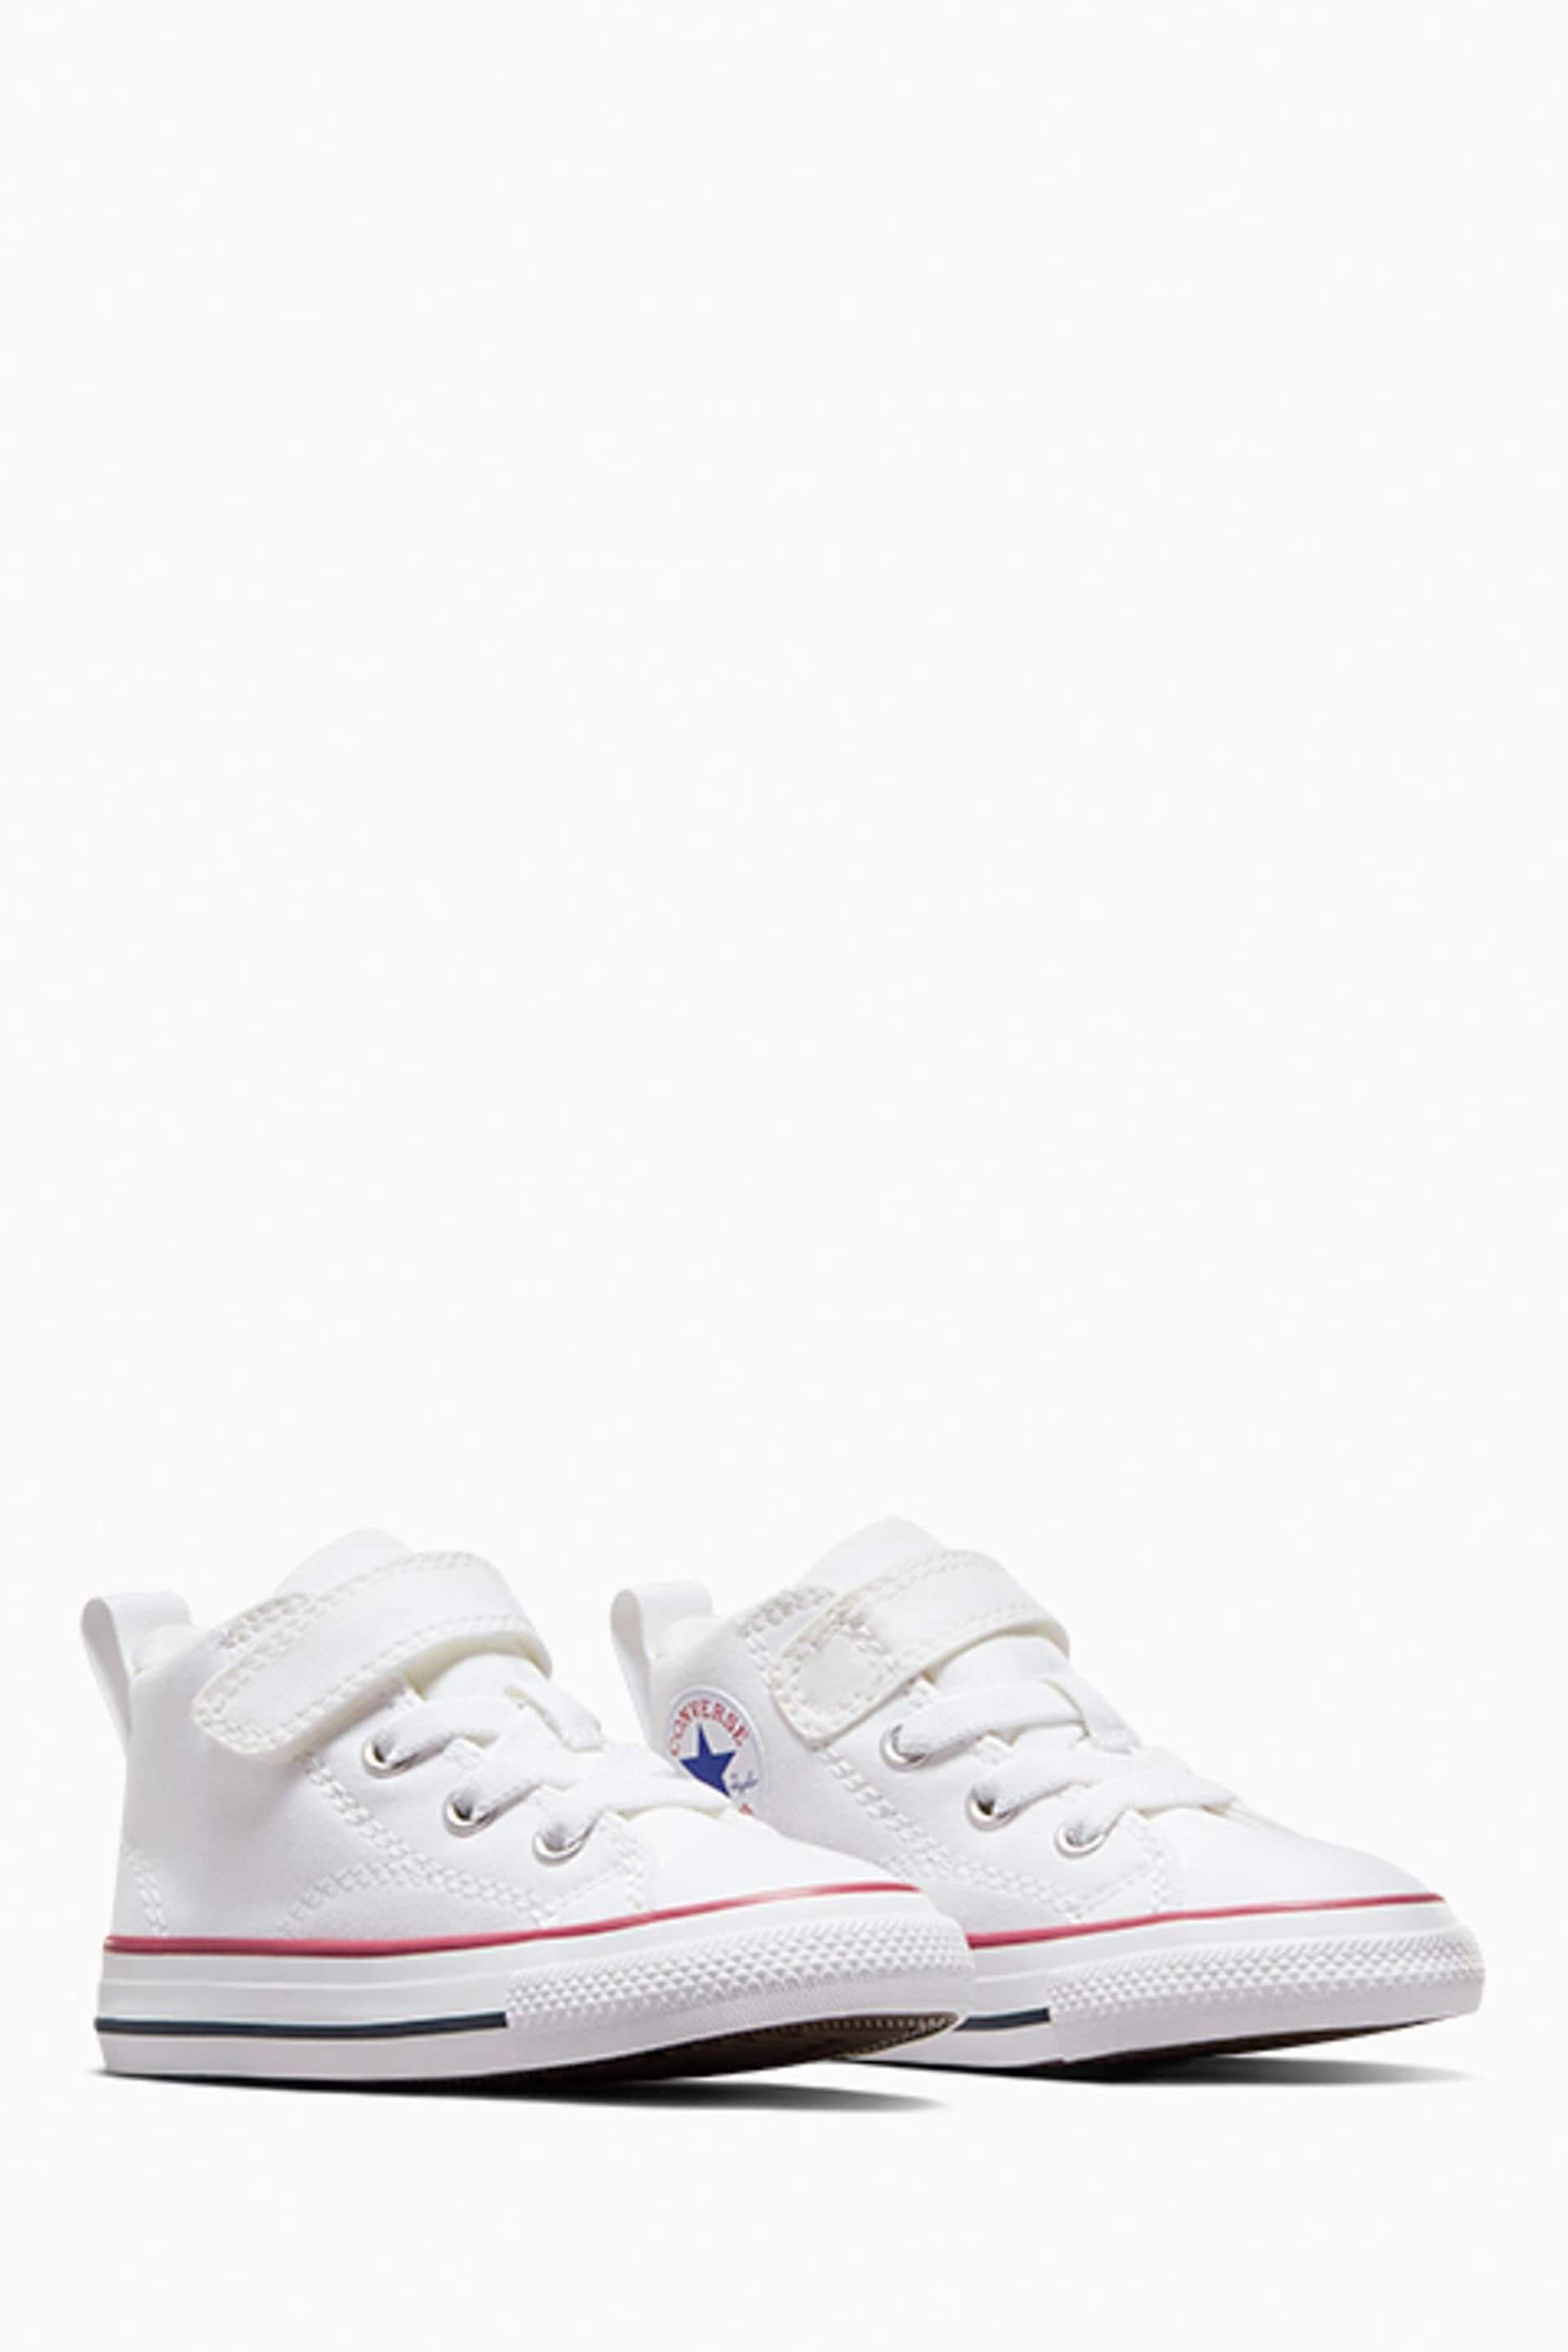 Converse White Malden Street Infant Trainers - Image 2 of 8